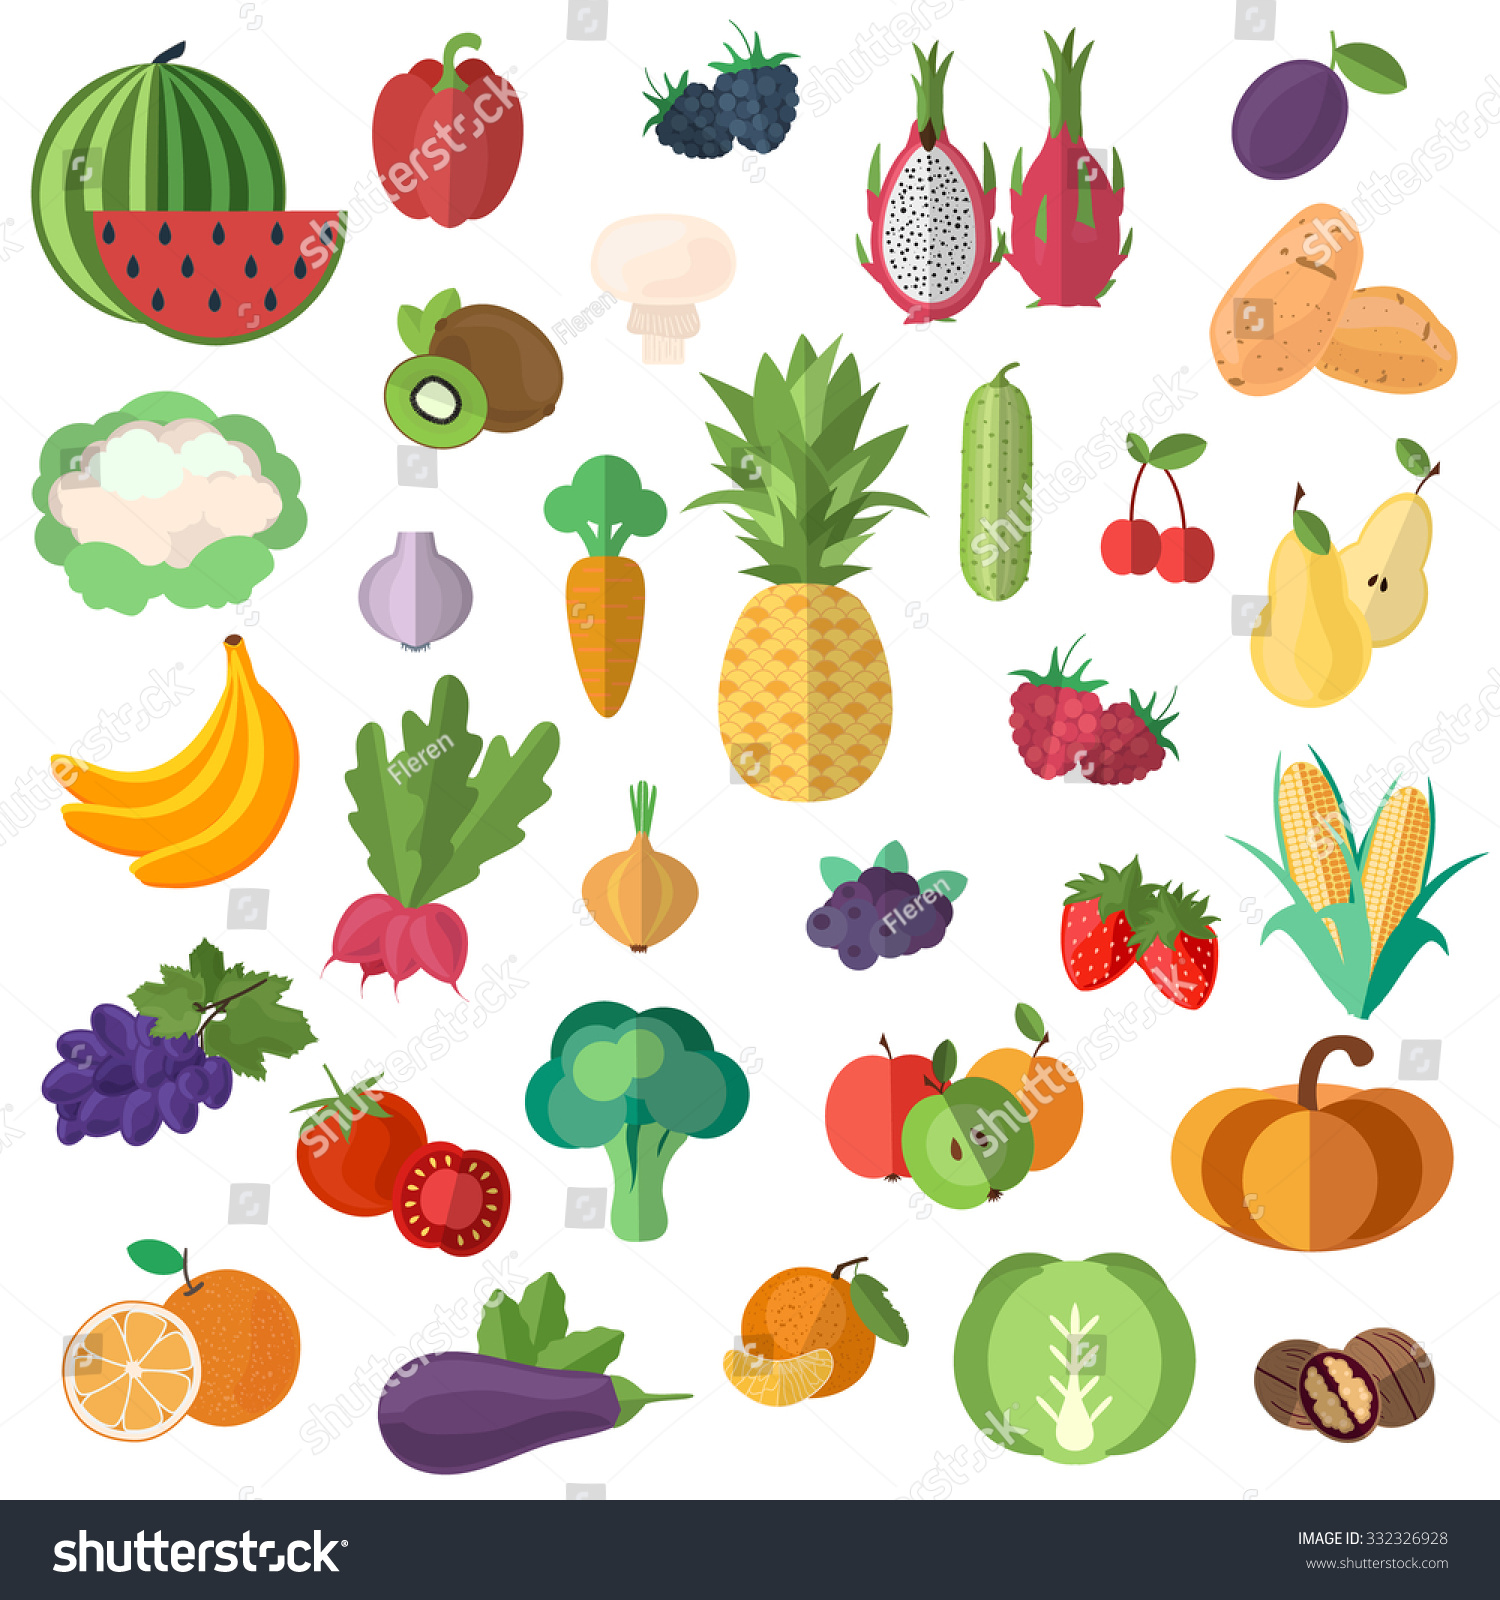 Big Collection Premium Quality Fruits Vegetables Stock Vector (Royalty ...